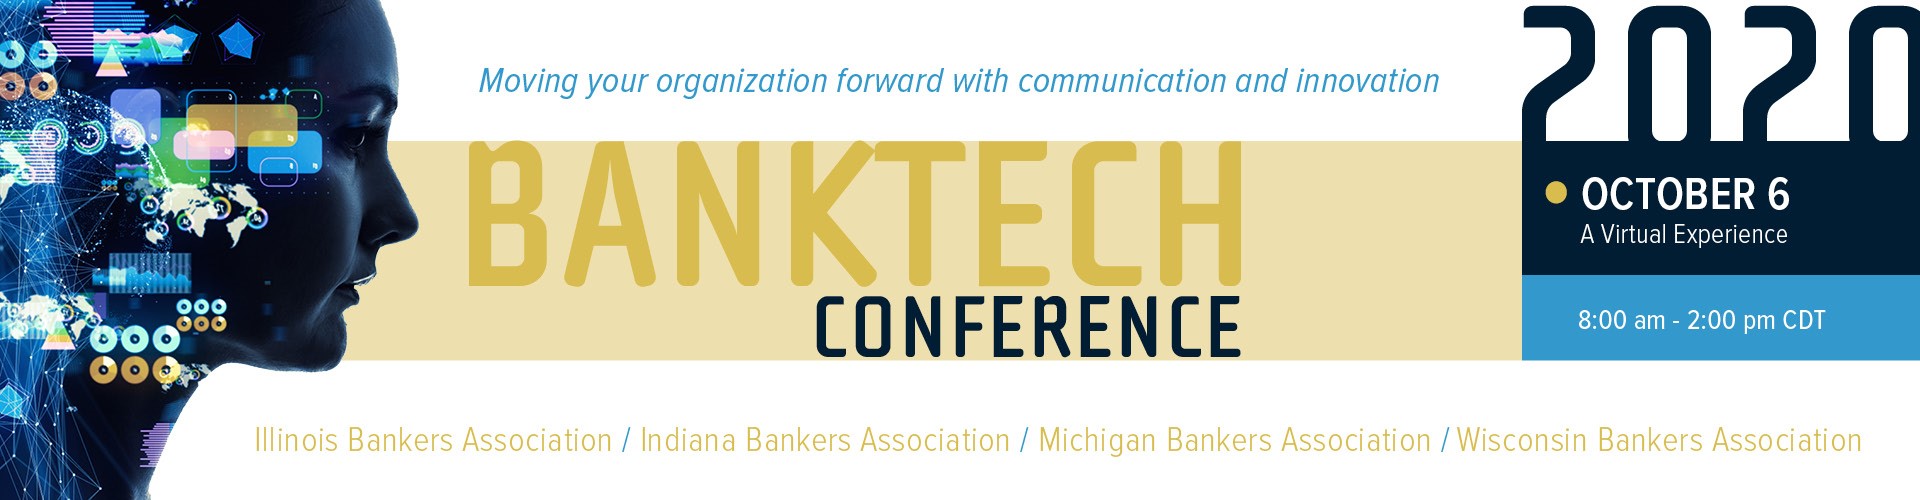 BANKTECH Conference Image